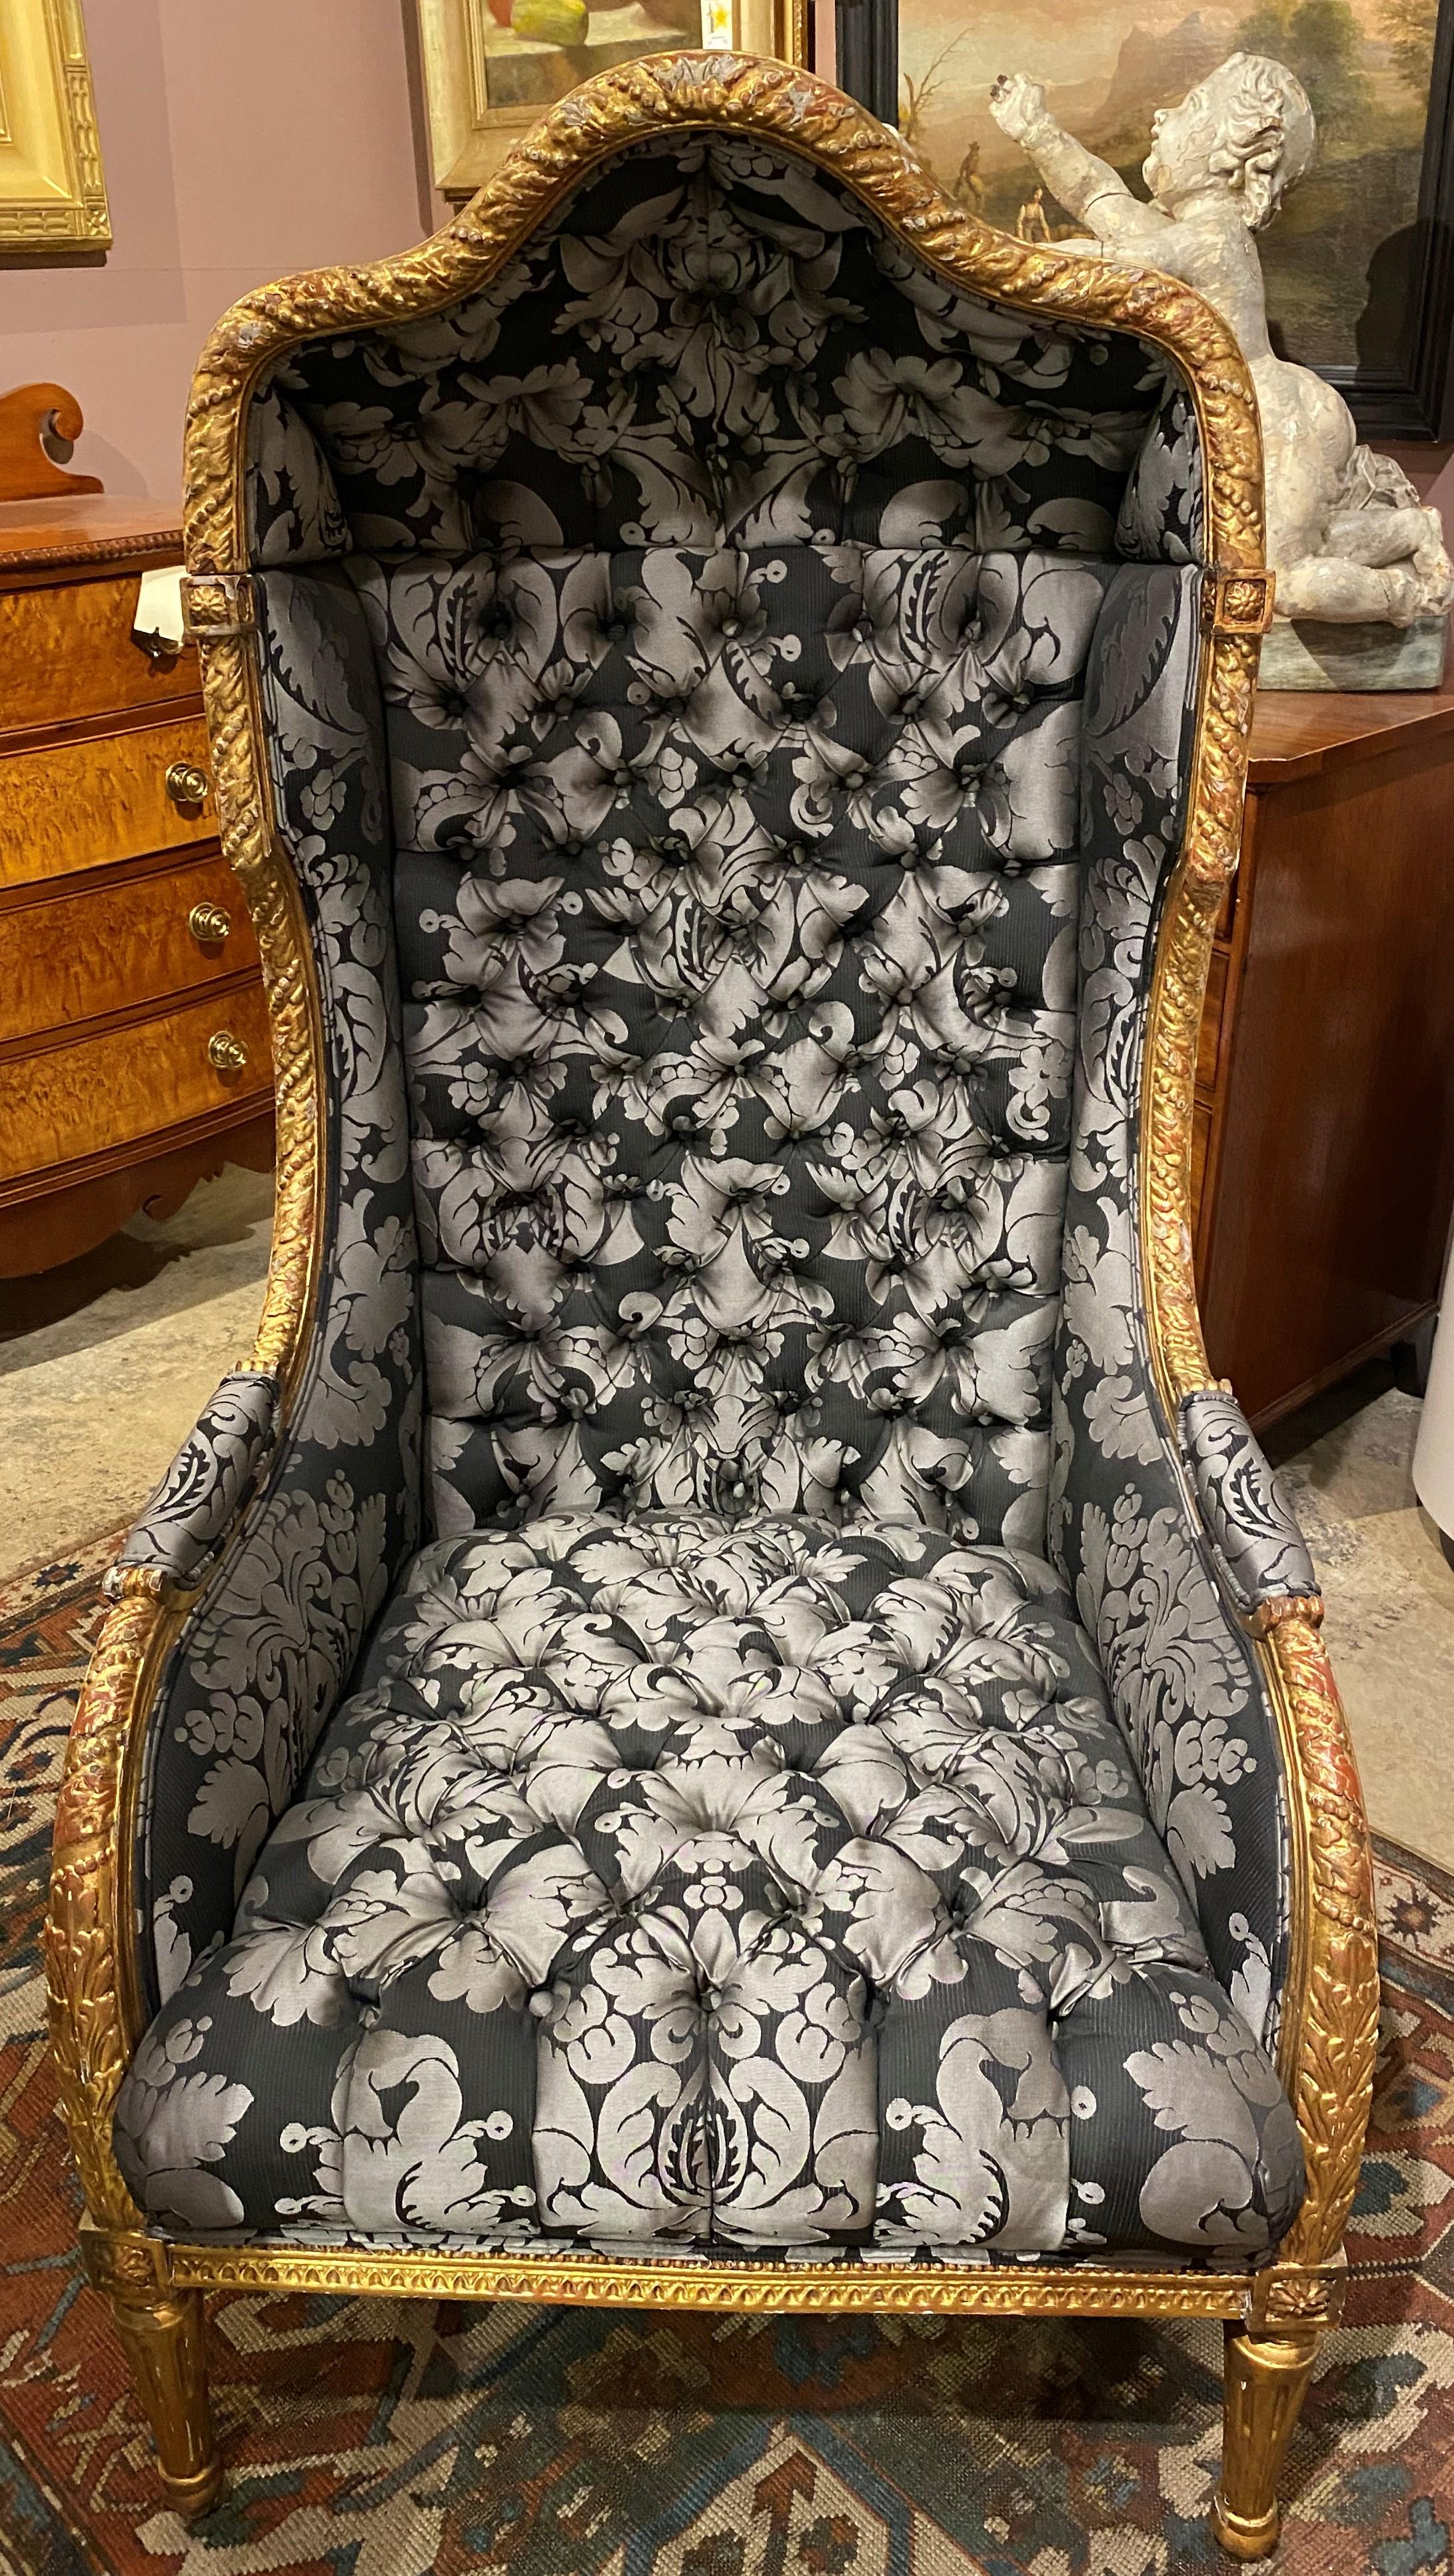 A fine example of a Louis XVI style porter’s or hood chair with carved giltwood frame, tufted gray foliate upholstery, supported by four tapered carved gilt legs. Very good overall condition, with some gilt losses, and minor imperfections and wear